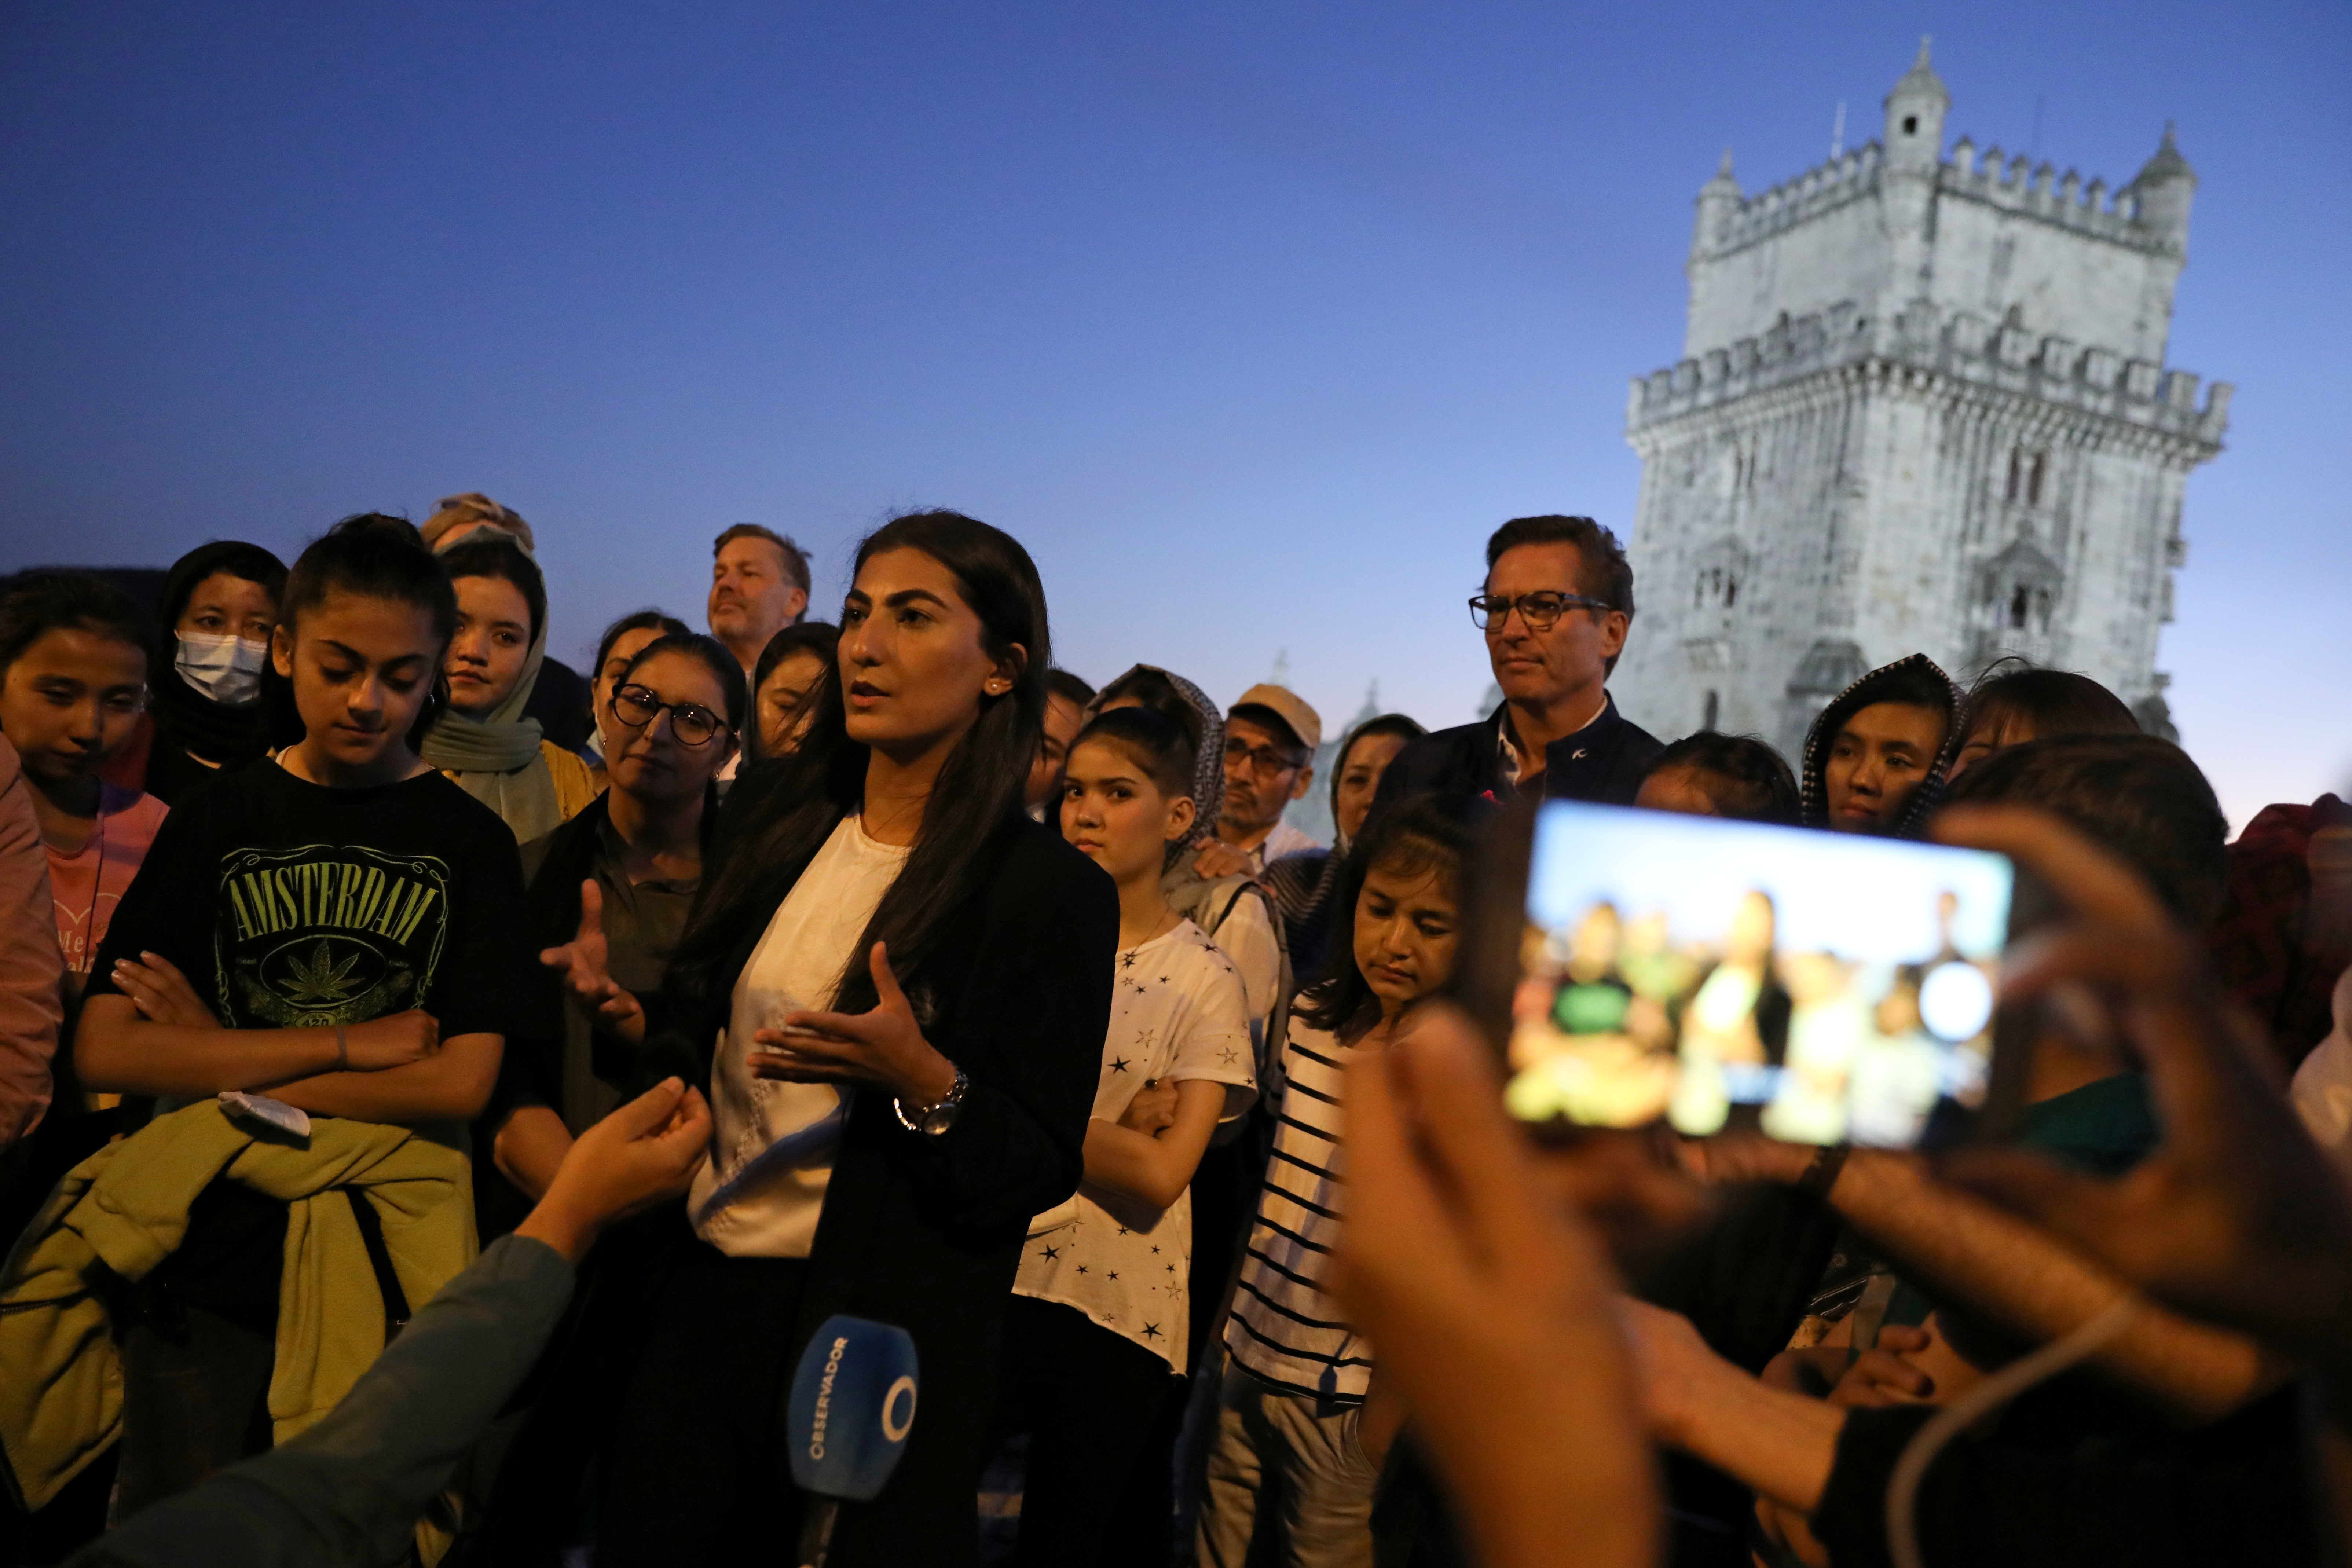 Captain of Afghanistan's national women's football team Muhtaj talks to the press at the Belem Tower in Lisbon